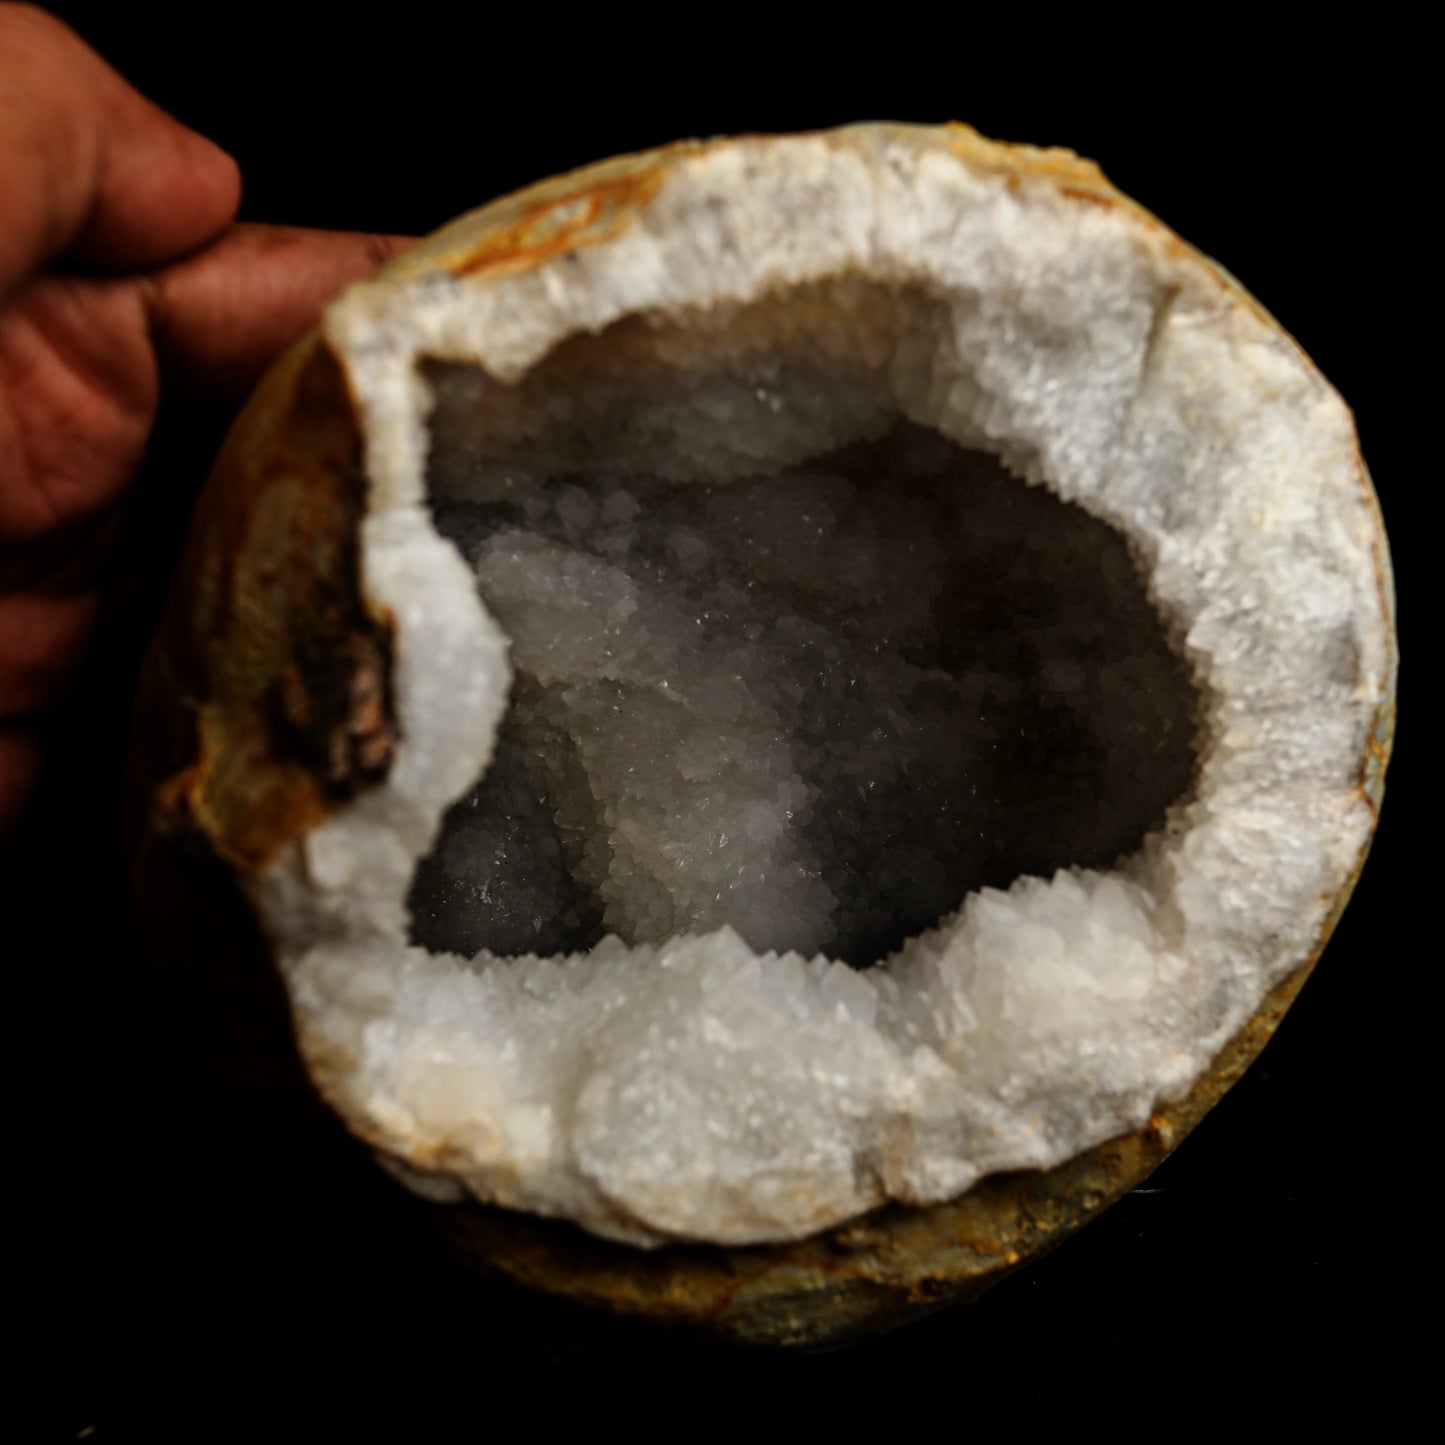 MM Quartz Geode Natural Mineral Specimen # B 5061  https://www.superbminerals.us/products/mm-quartz-geode-natural-mineral-specimen-b-5061  Features: With a geode lined with beige, glossy MM Quartz crystals, this is a beautiful piece. The crystals have a glossy, almost crystalline sheen to them, and their edges are sharp. This item has a gleaming sheen to it.